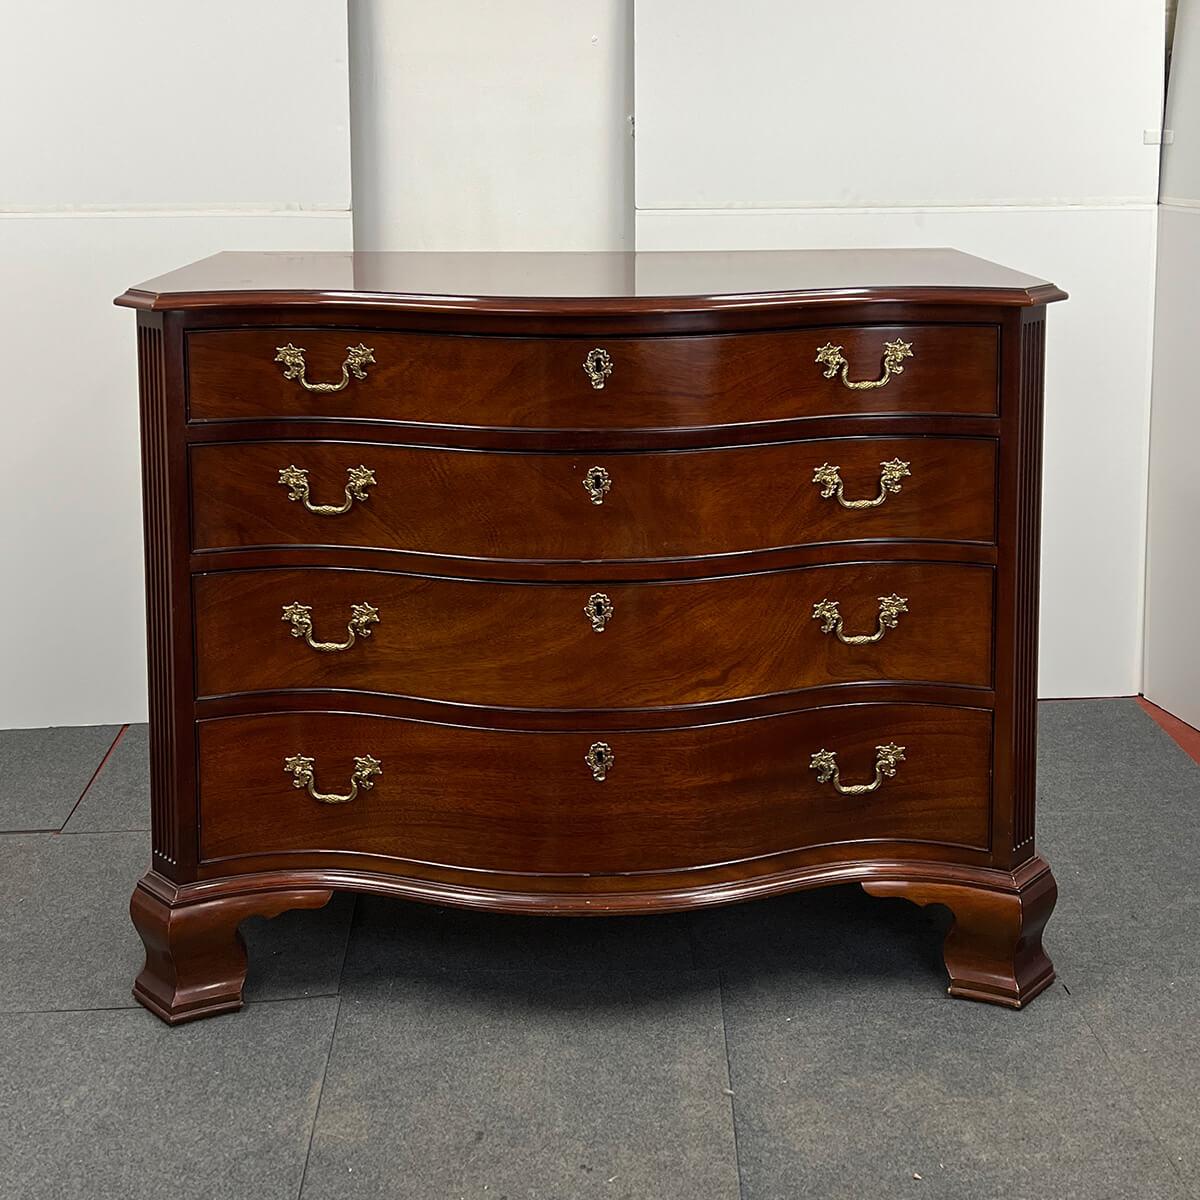 George III Style mahogany serpentine chest of drawers, with a shaped and molded edge top, above four graduated drawers, the top one being fitted with sections, with canted and fluted corners on shaped ogee bracket feet. Late 20th century, by Kindel